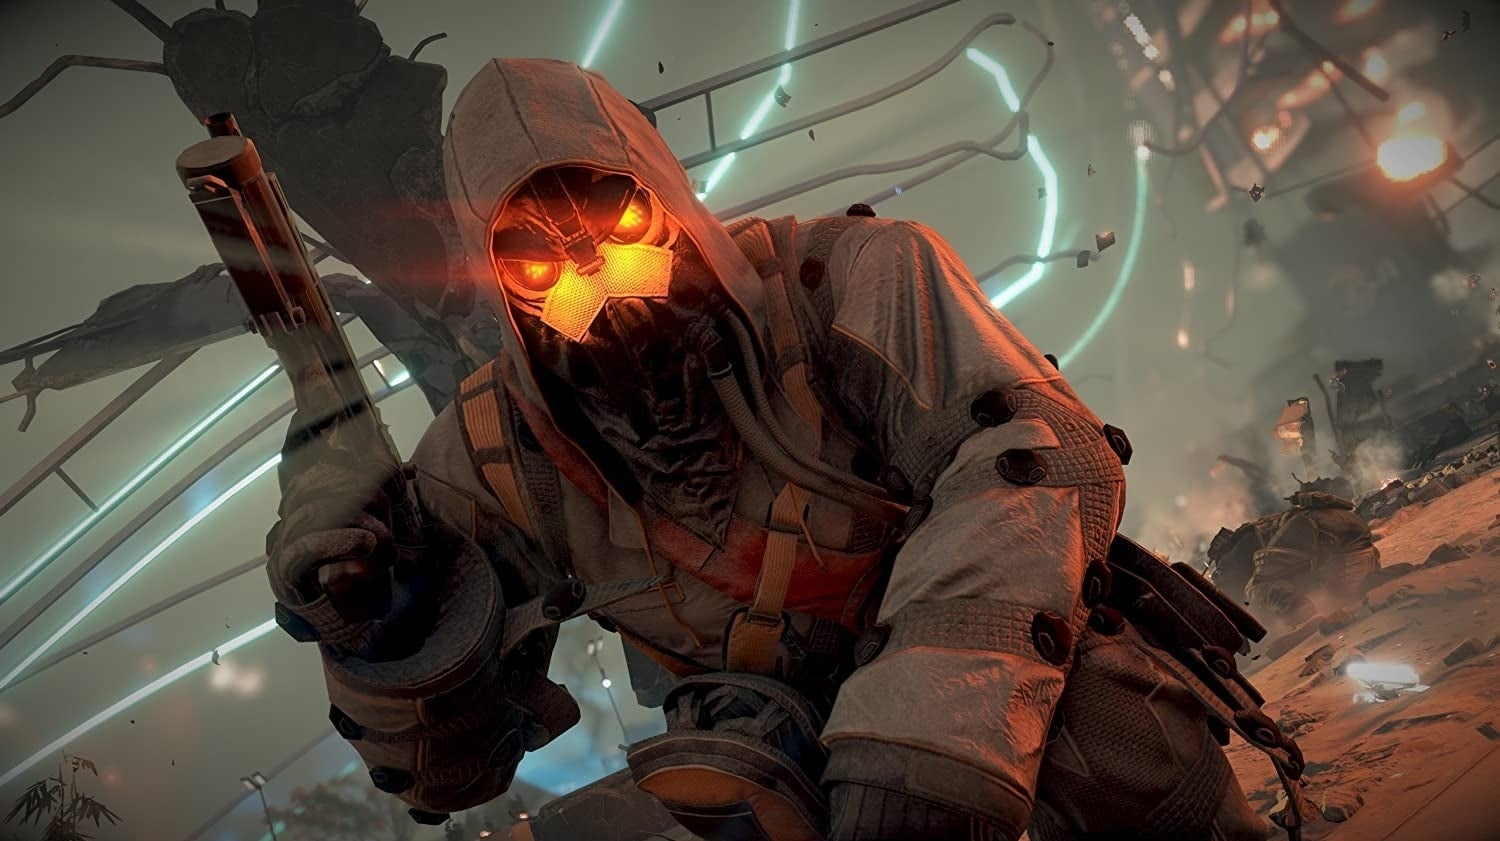 Image for Official Killzone website retired, affecting Shadow Fall clans